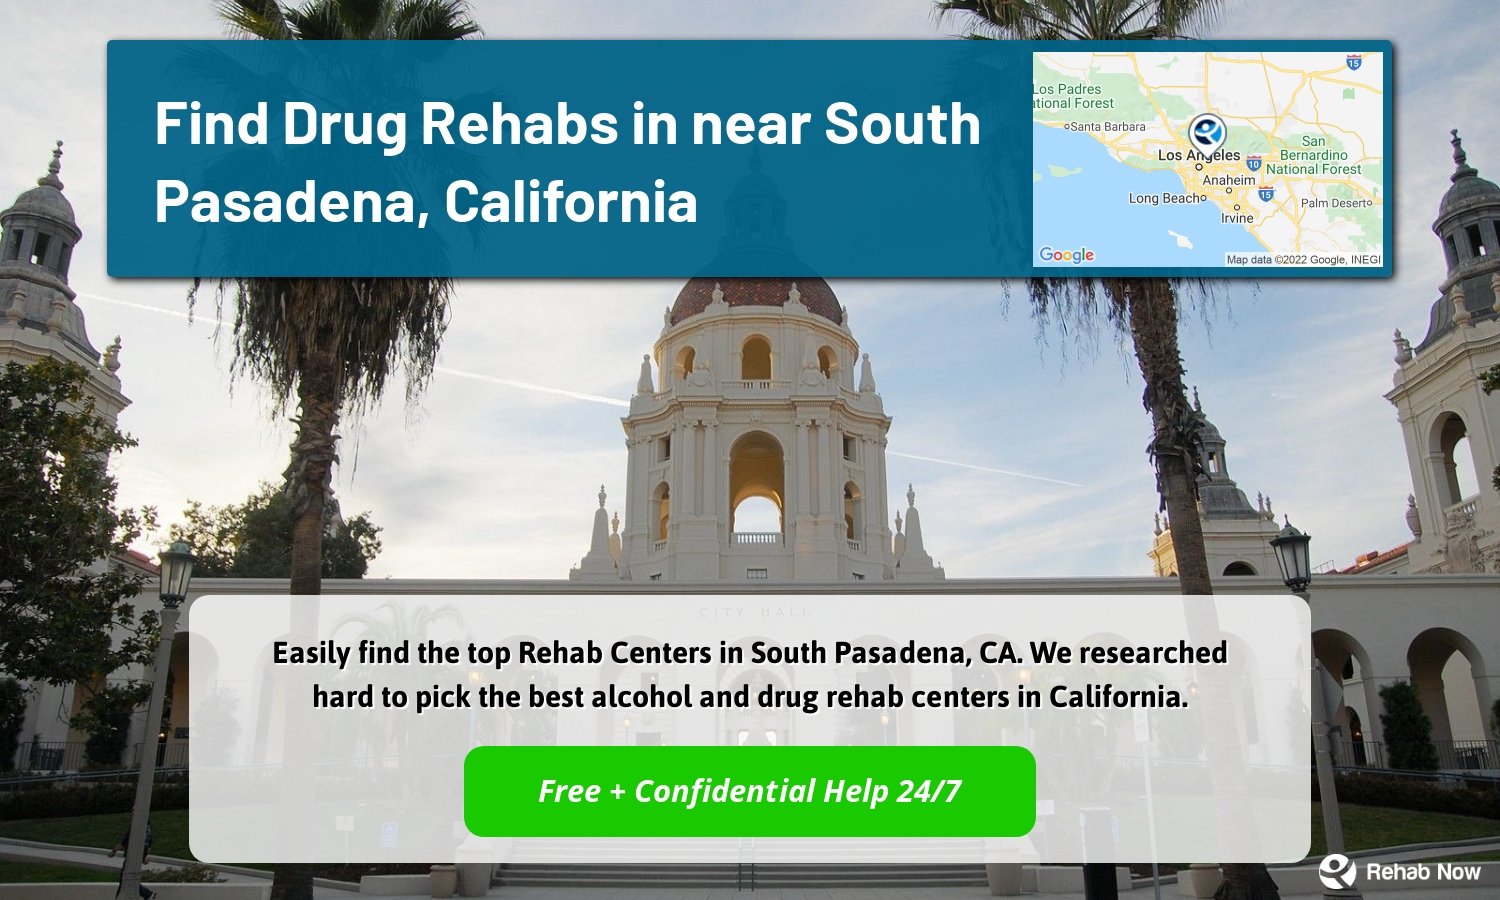 Easily find the top Rehab Centers in South Pasadena, CA. We researched hard to pick the best alcohol and drug rehab centers in California.